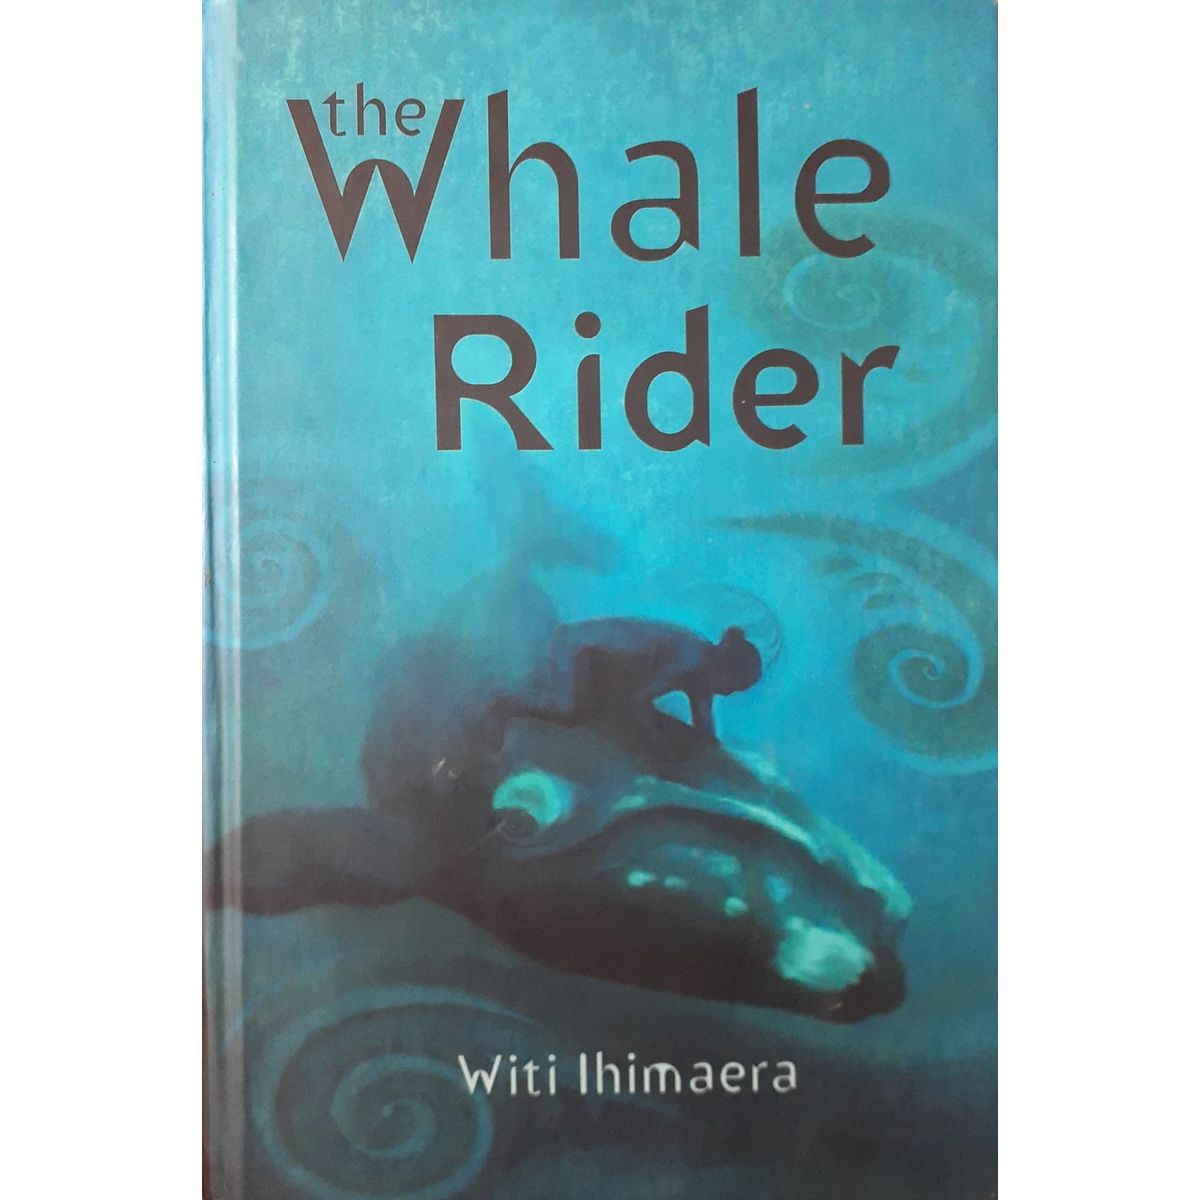 ISBN: 9780790008707 / 079000870X - The Whale Rider by Witi Ihimaera [2002]